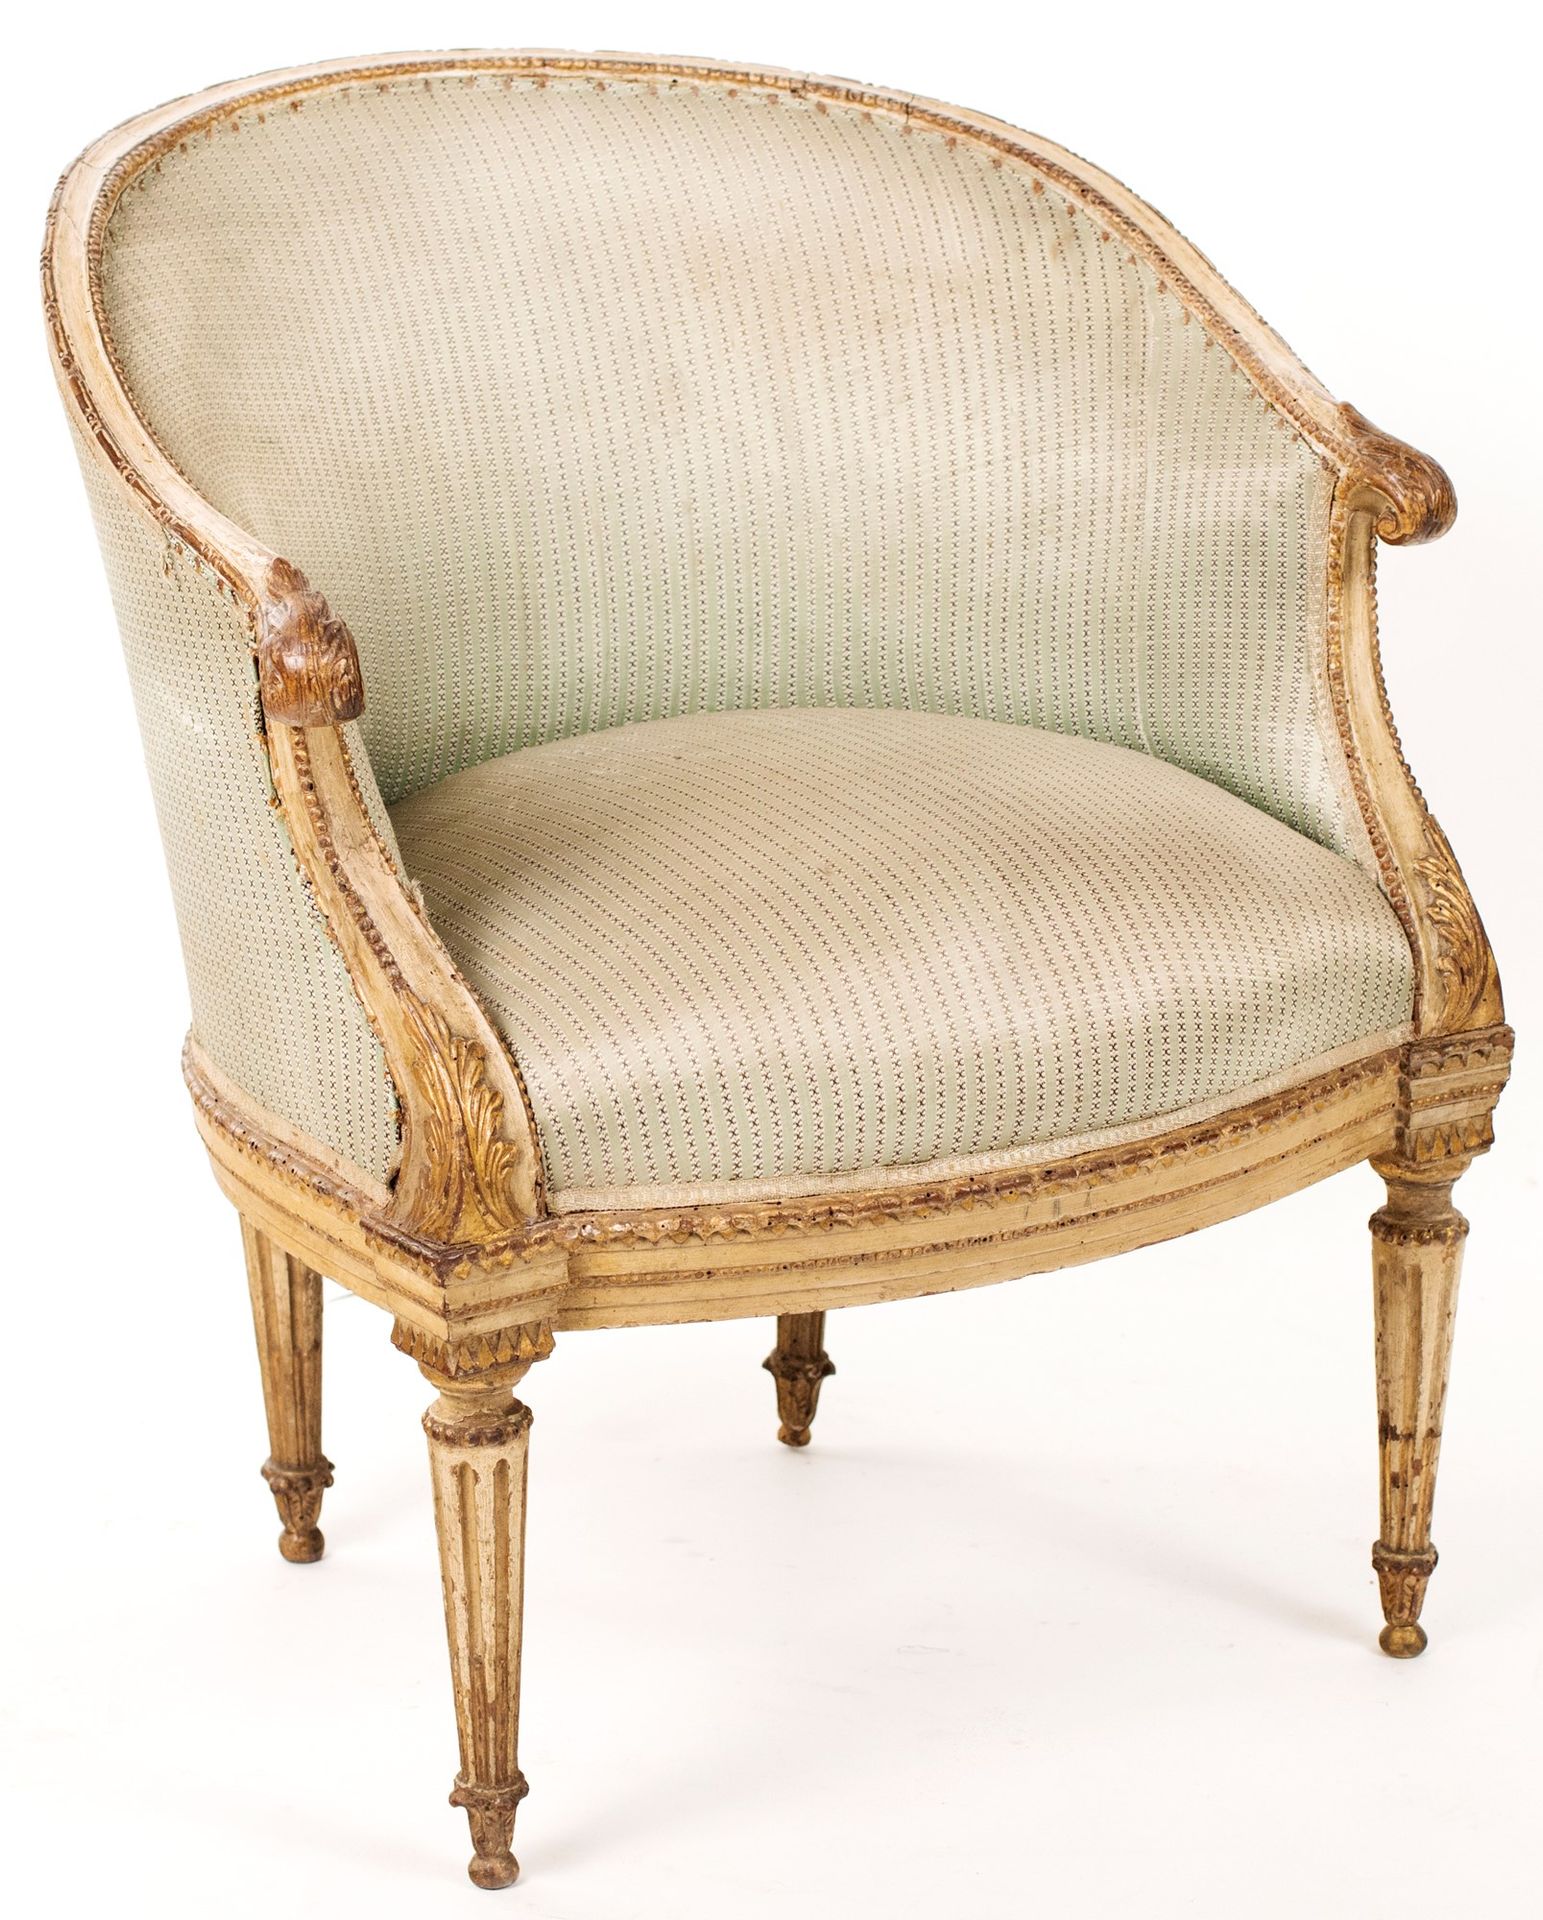 Cockpit armchair in lacquered and gilded wood, 19th century con perfiles cruzado&hellip;